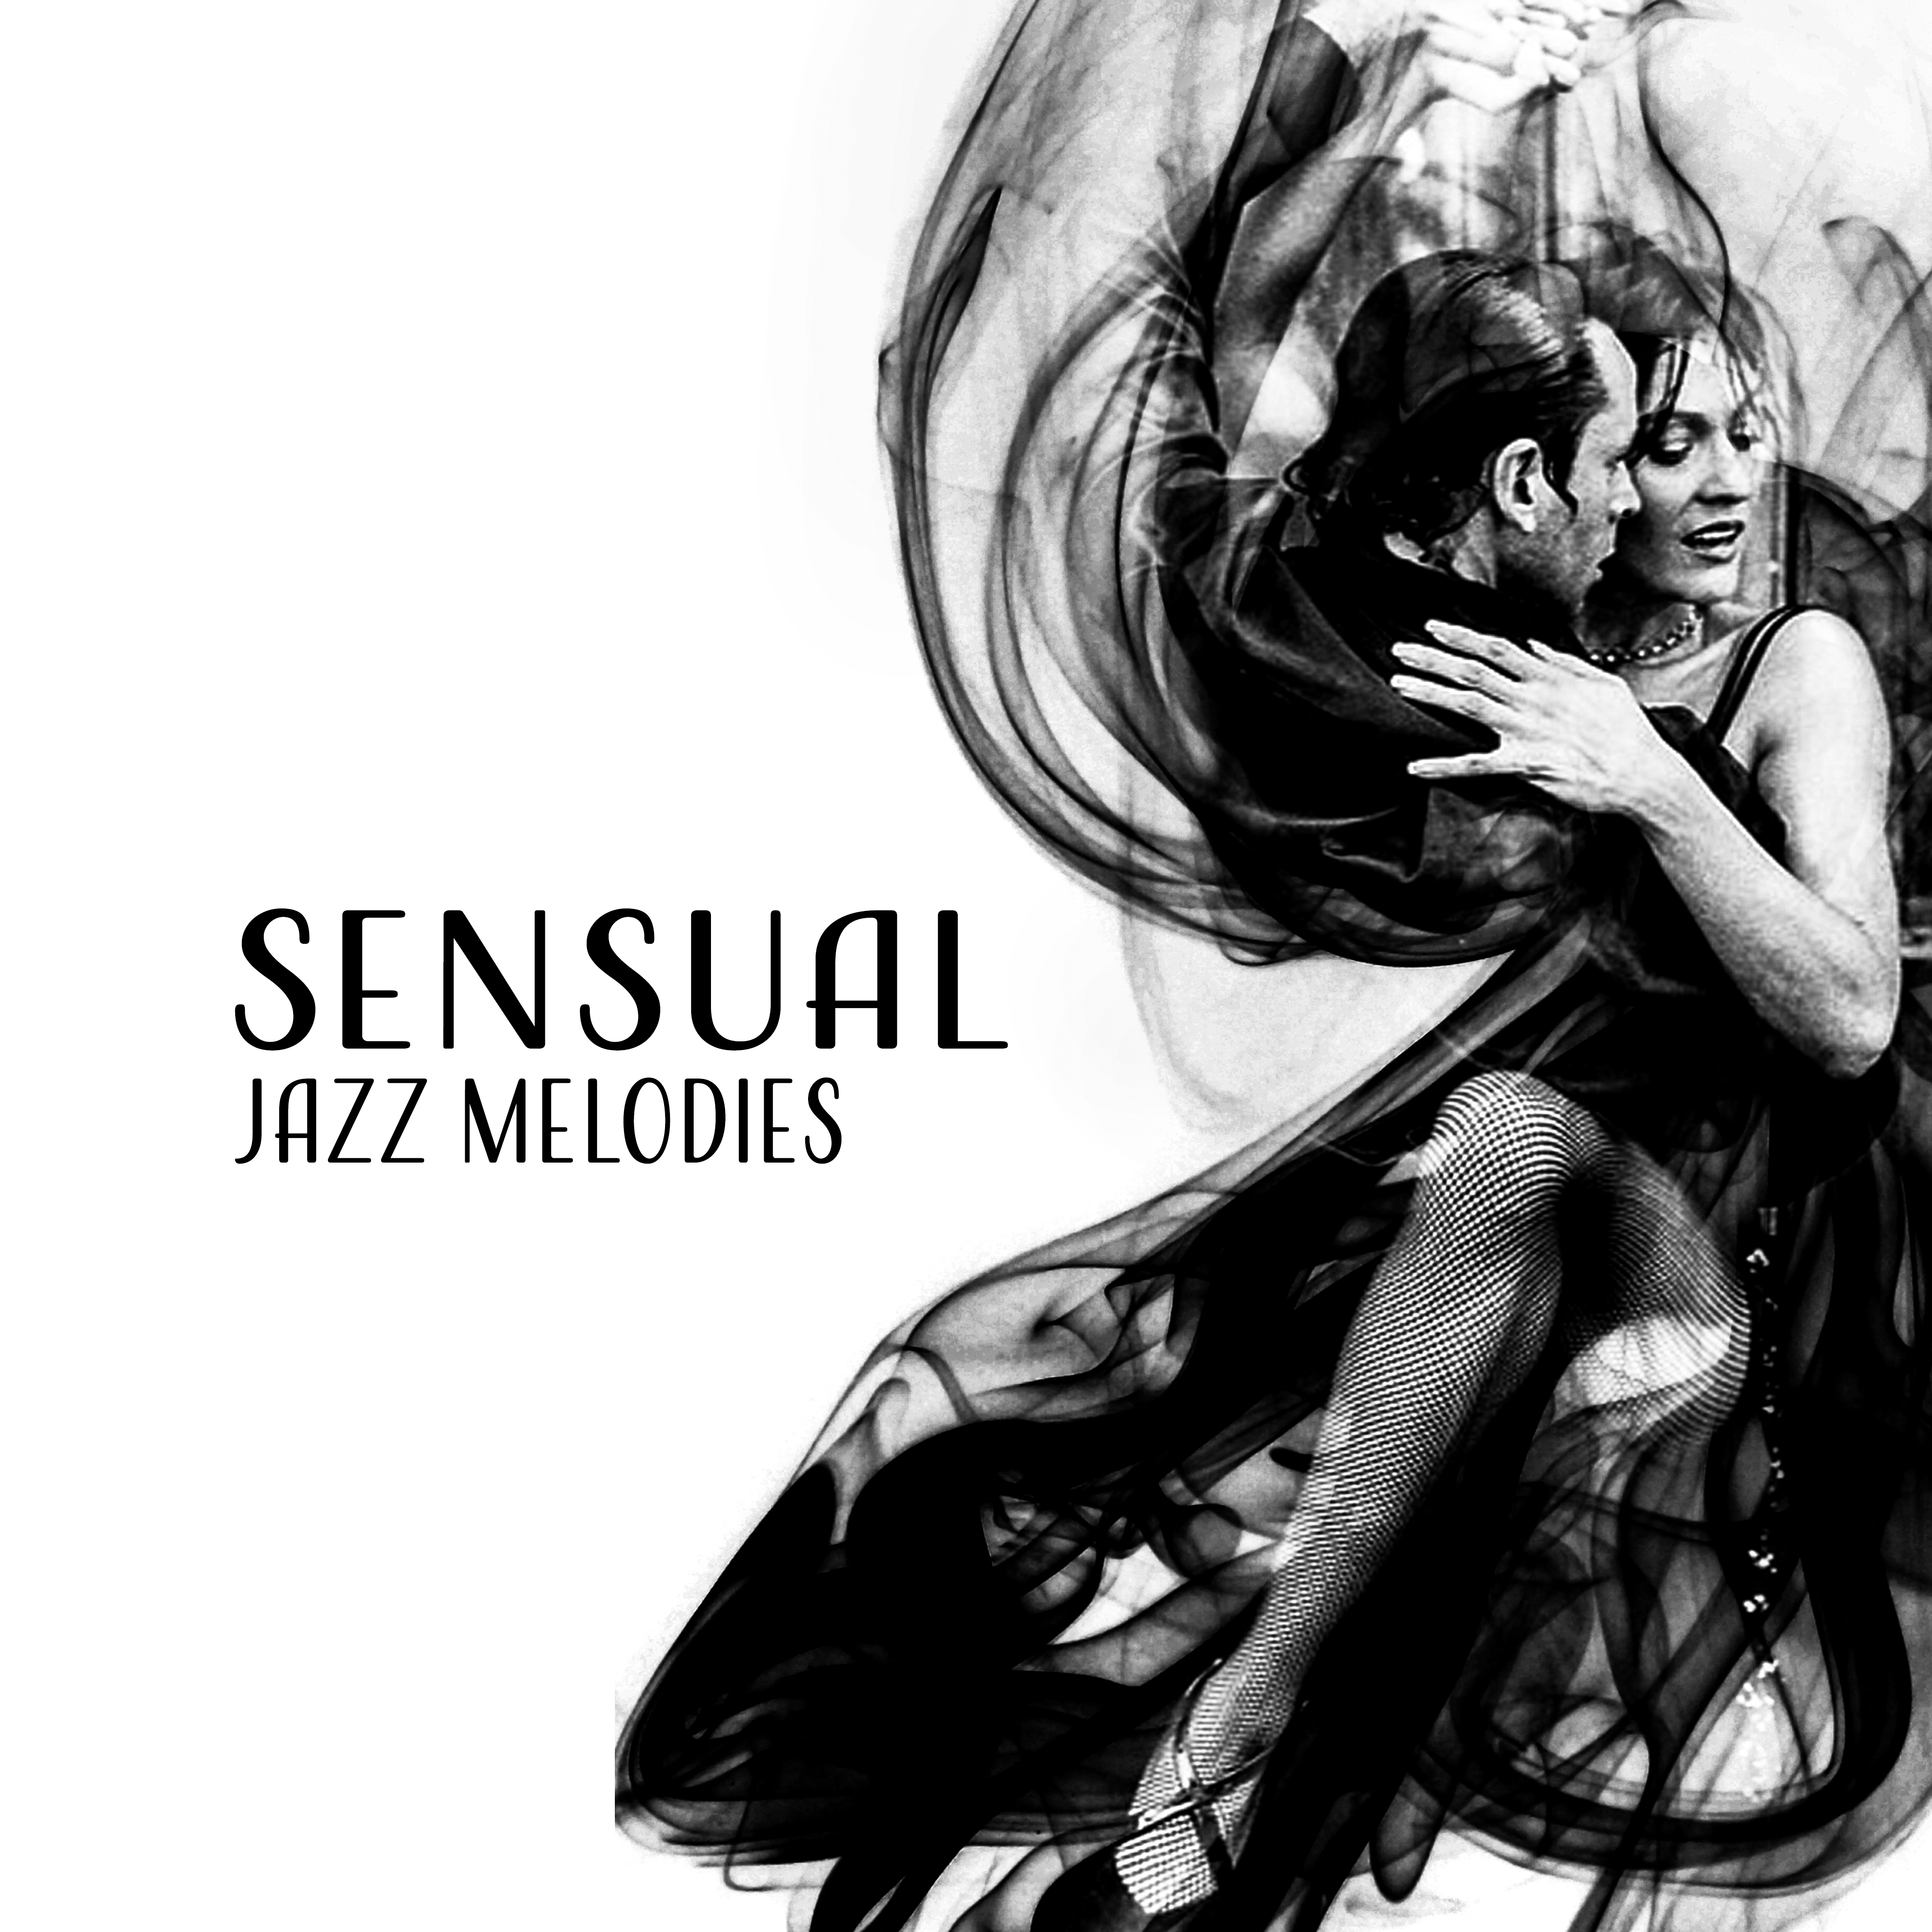 Sensual Jazz Melodies  Easy Listening, Romantic Jazz Music, Sounds to Calm Down, Stress Relieve, Piano Bar